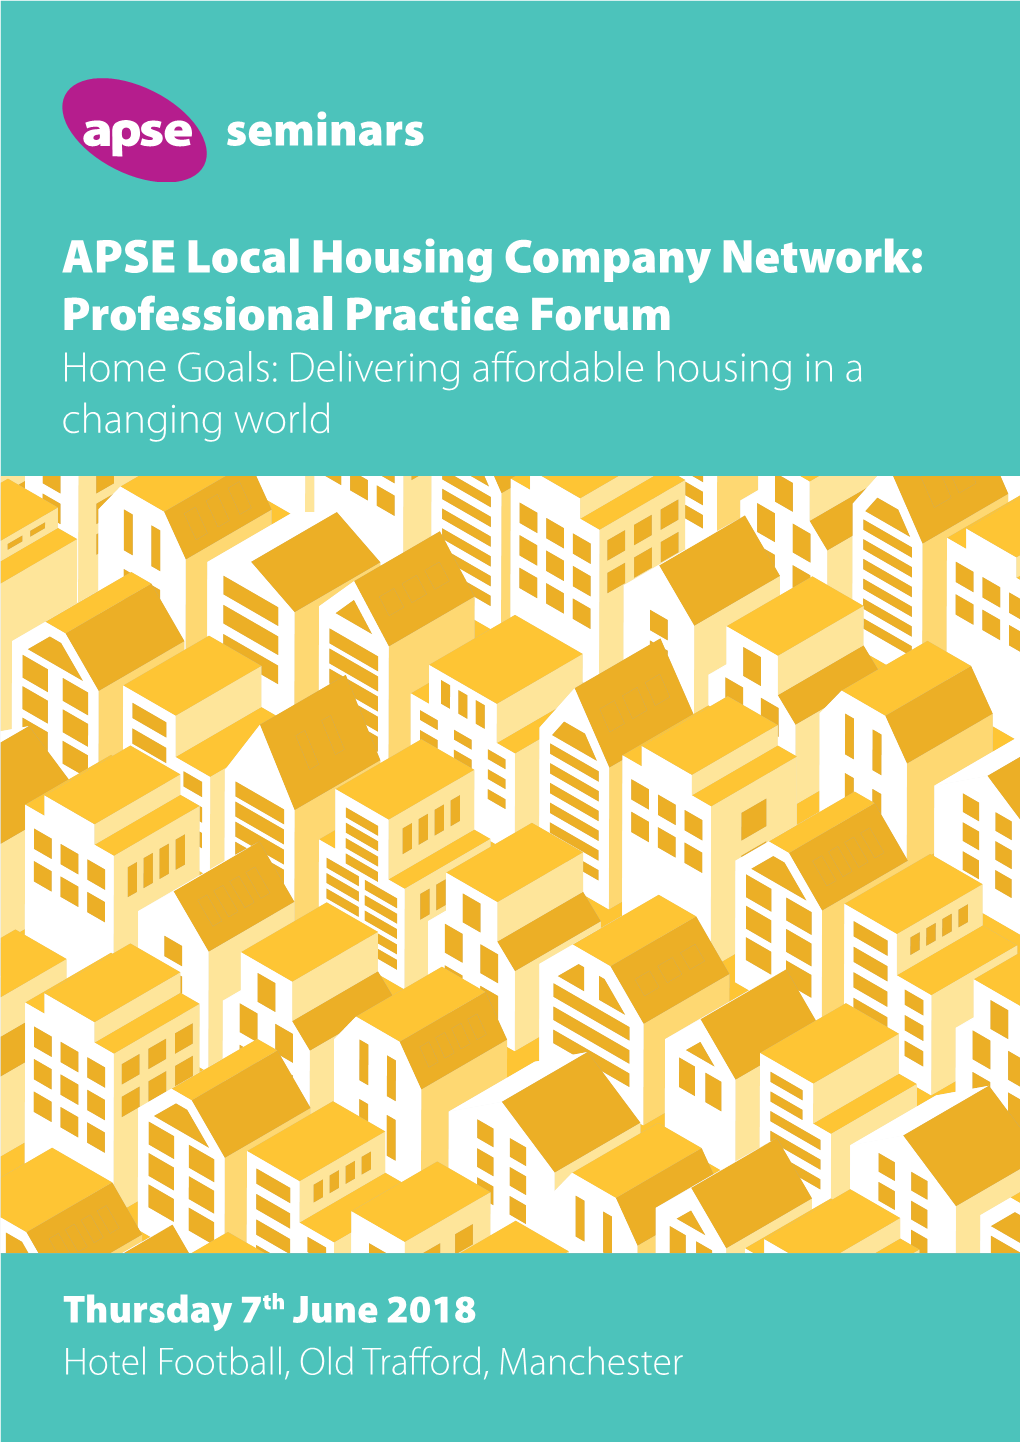 APSE Local Housing Company Network: Professional Practice Forum Home Goals: Delivering Affordable Housing in a Changing World